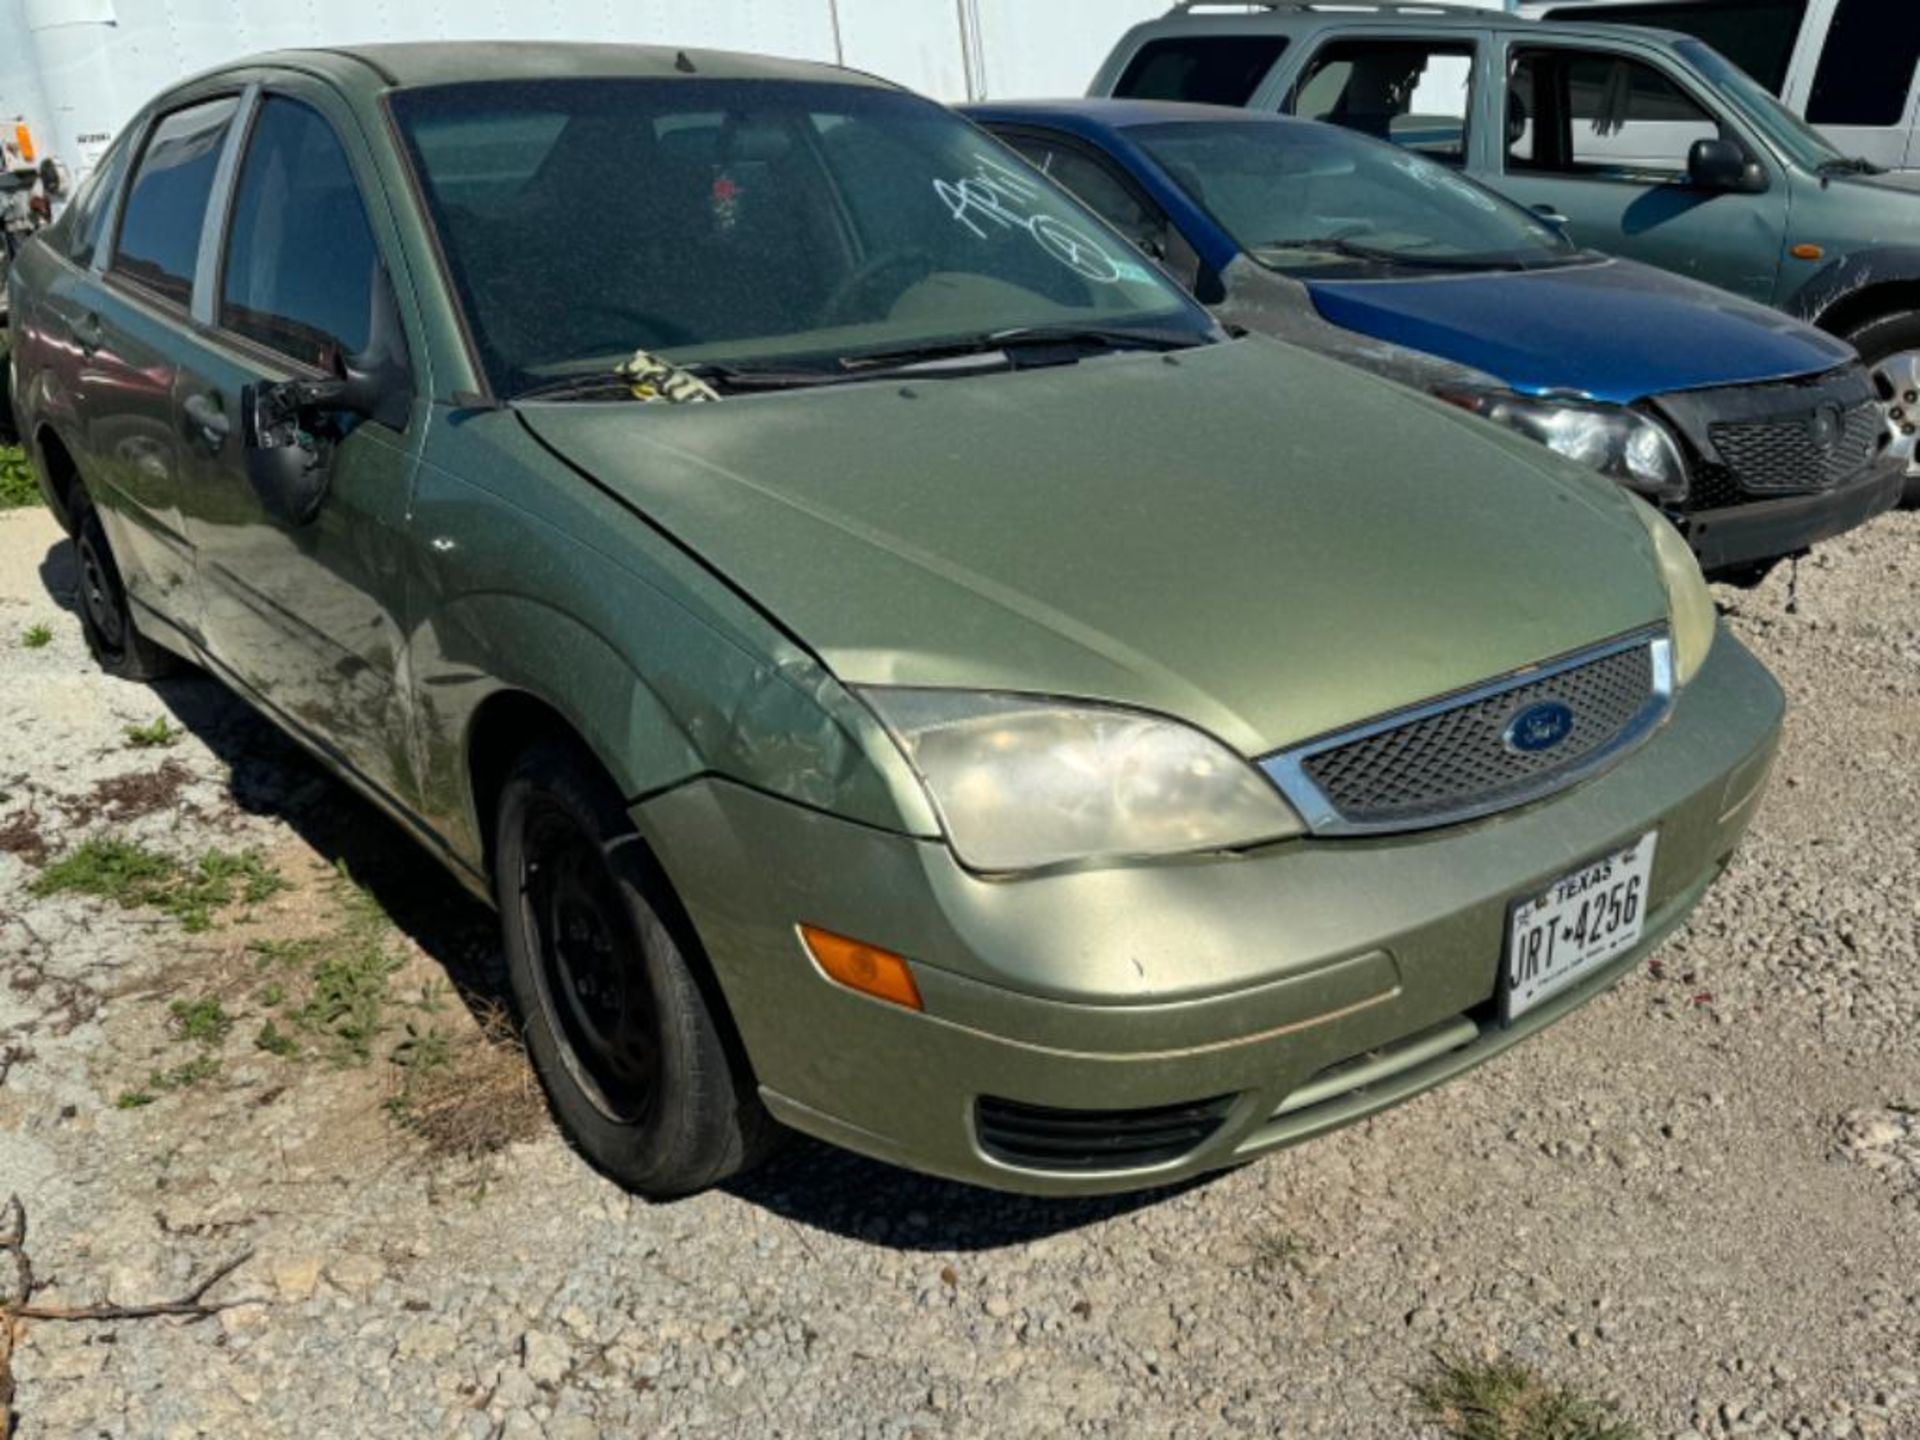 2007 Ford Focus - Image 7 of 12